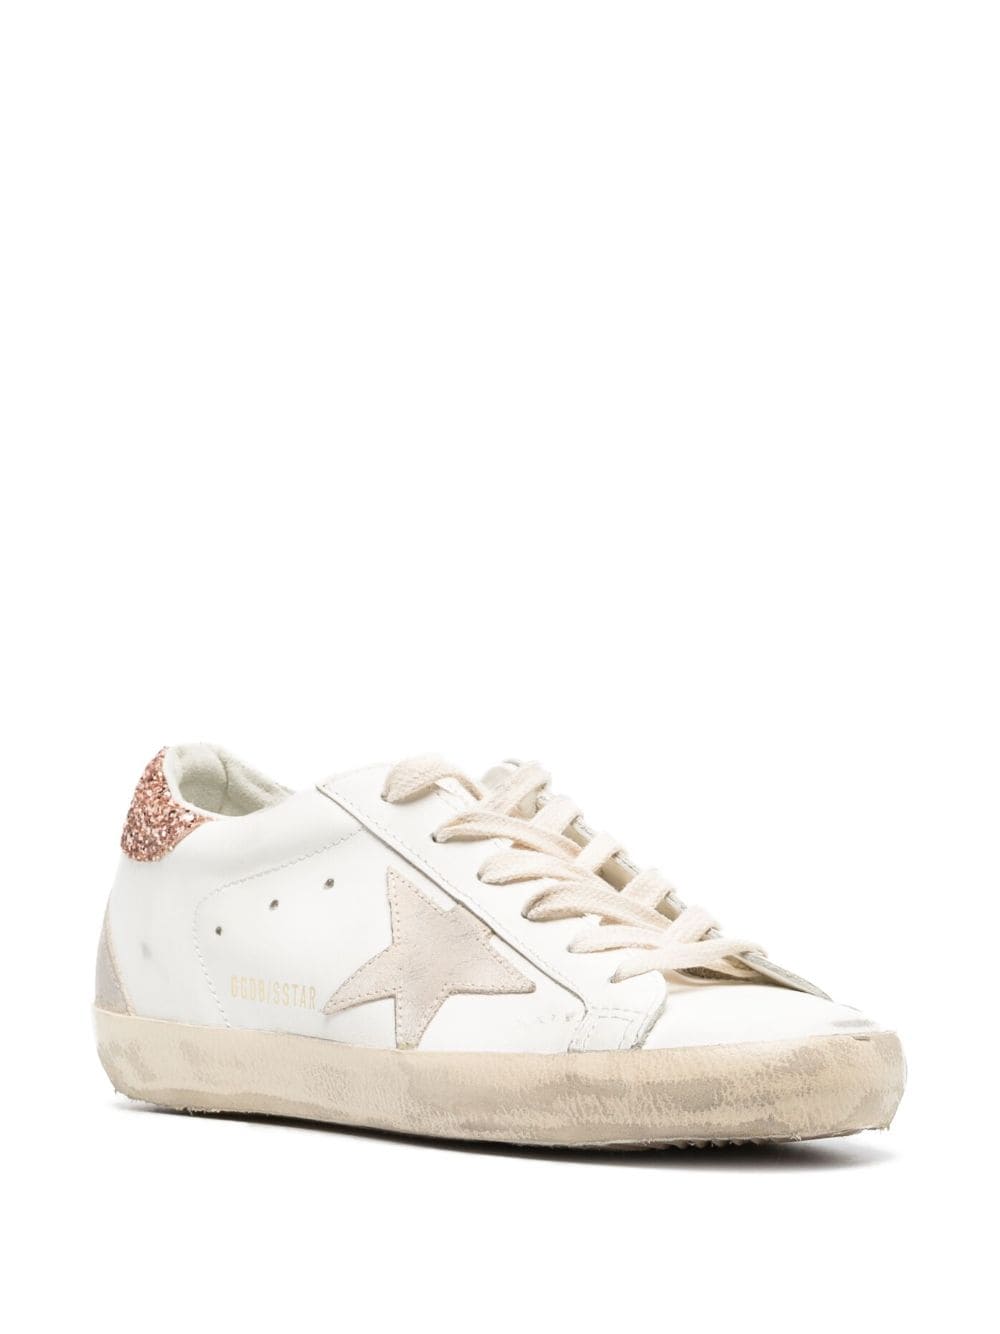 Golden Goose Super-Star low-top Leather Sneakers - Farfetch